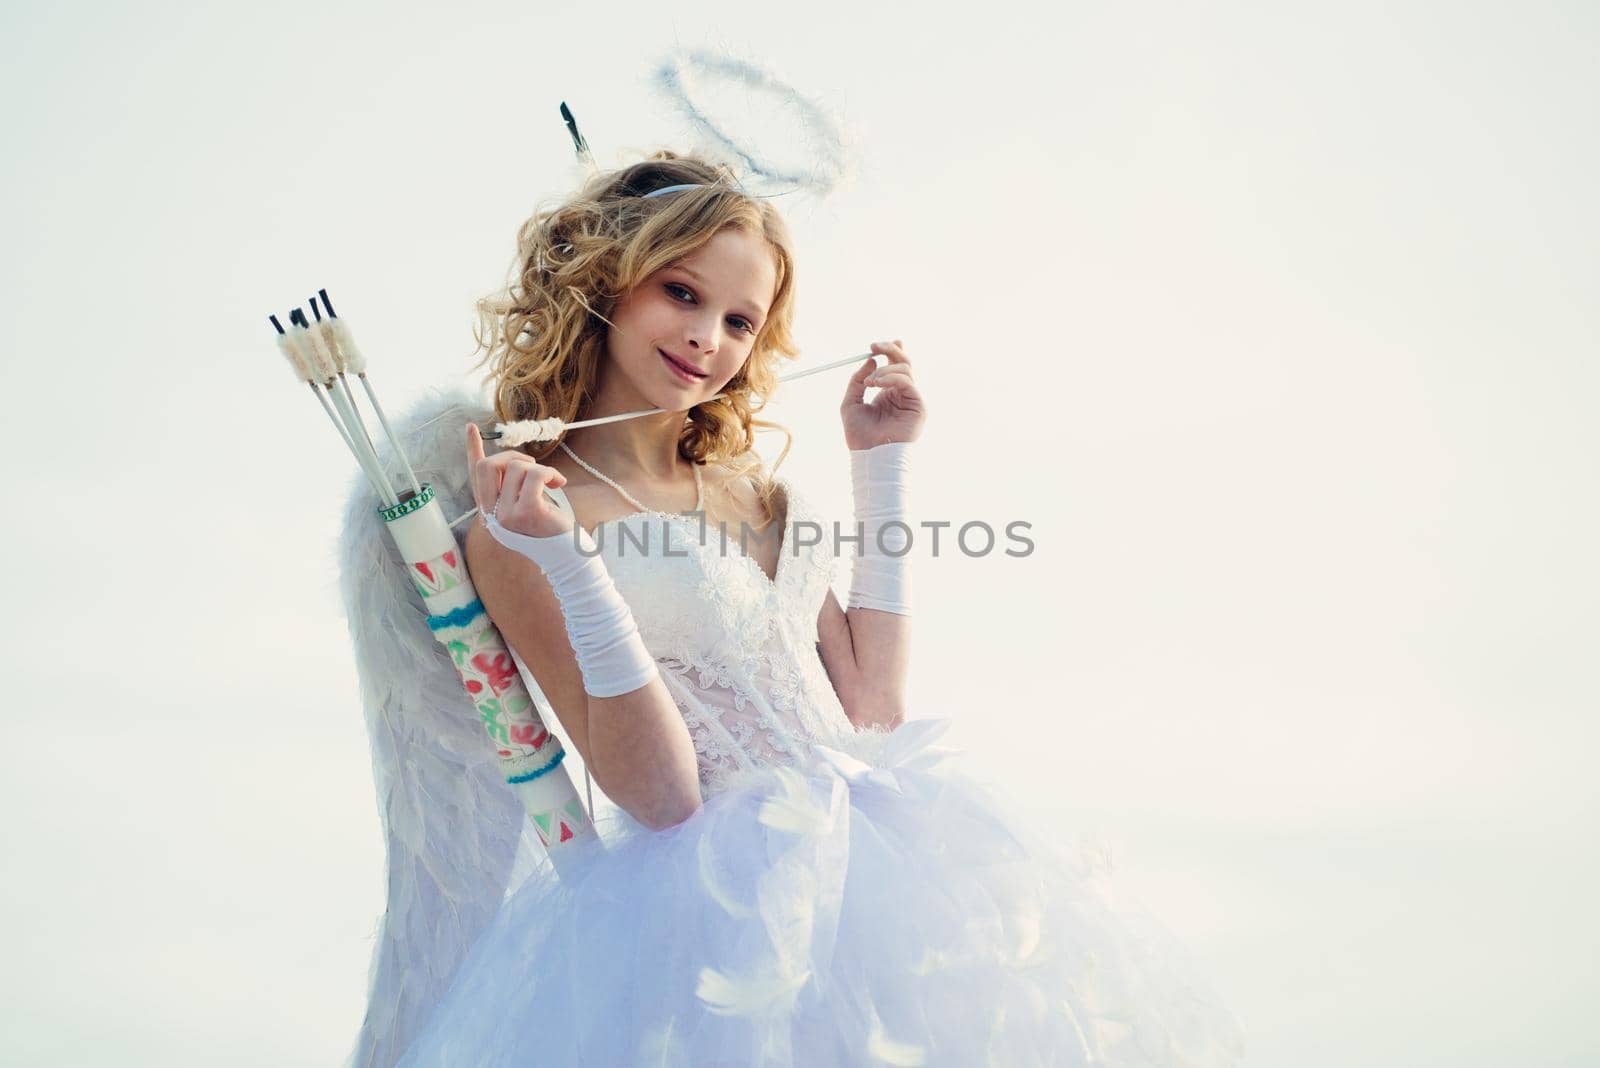 Arrow of love. Cupid in valentine day. Teen angel. Cupid cute angel with bow and arrows. Charming curly little girl in white dress and wings - angel cupid girl.